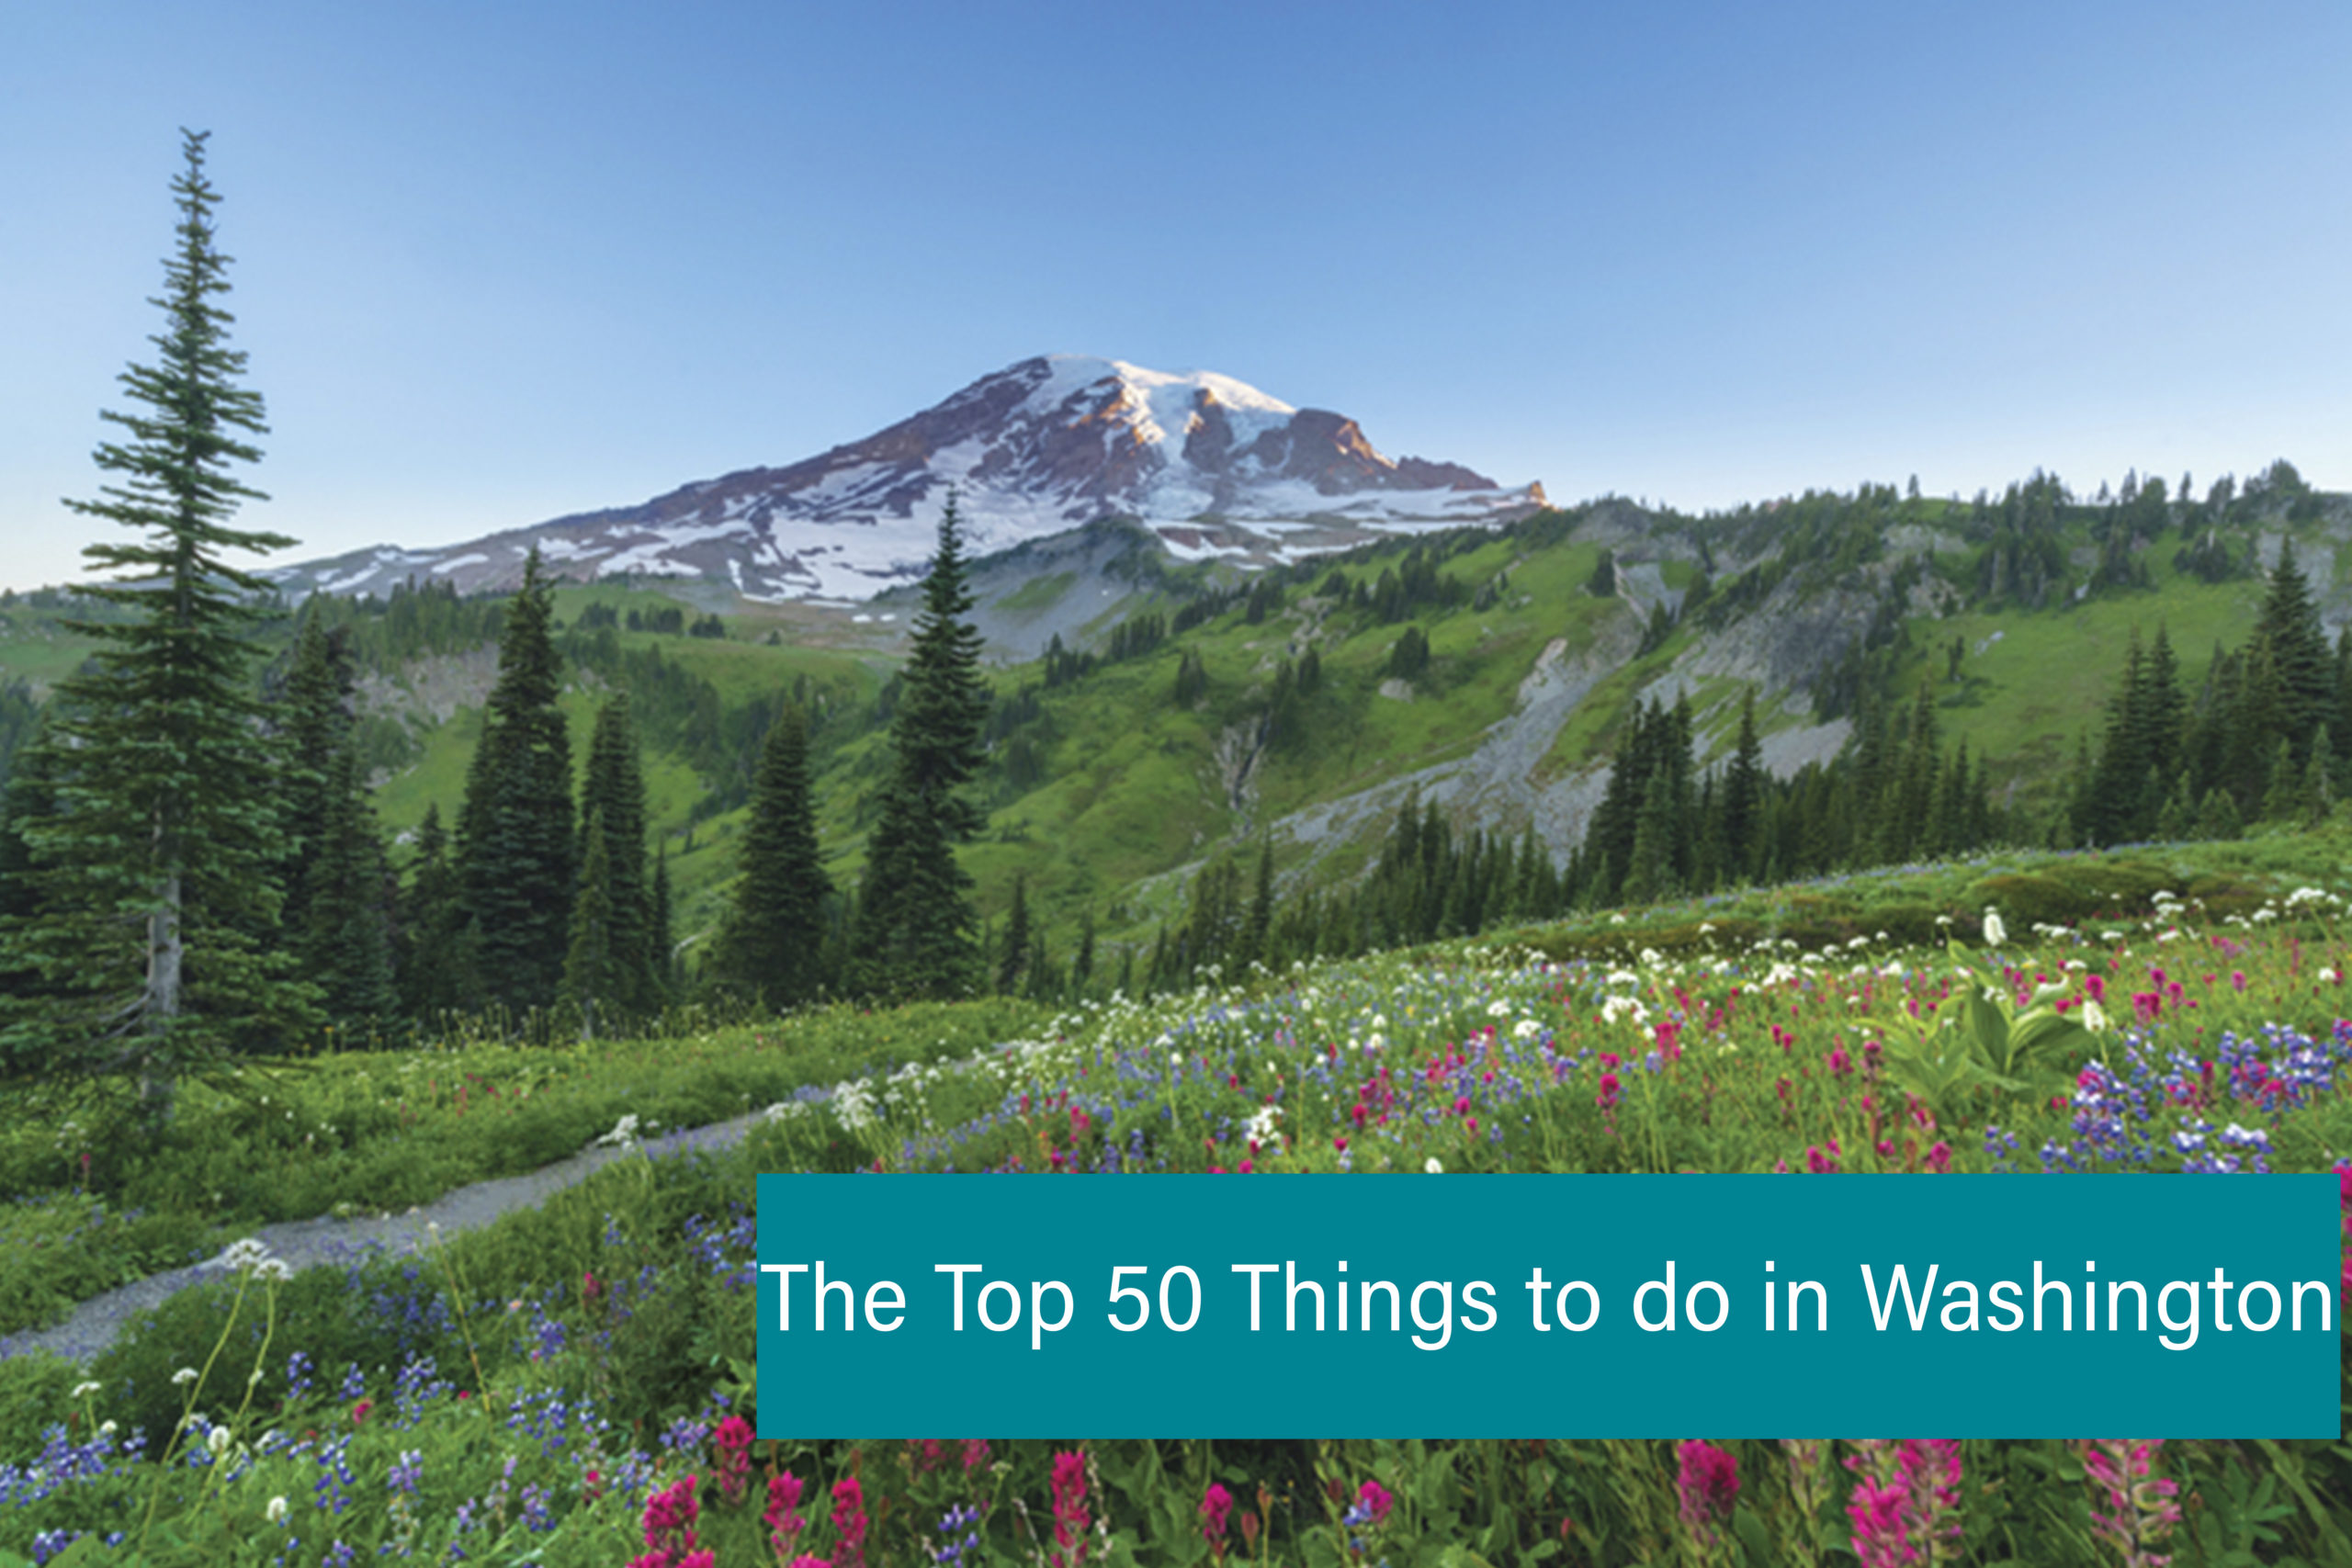 The top 50 things to do in Washington State